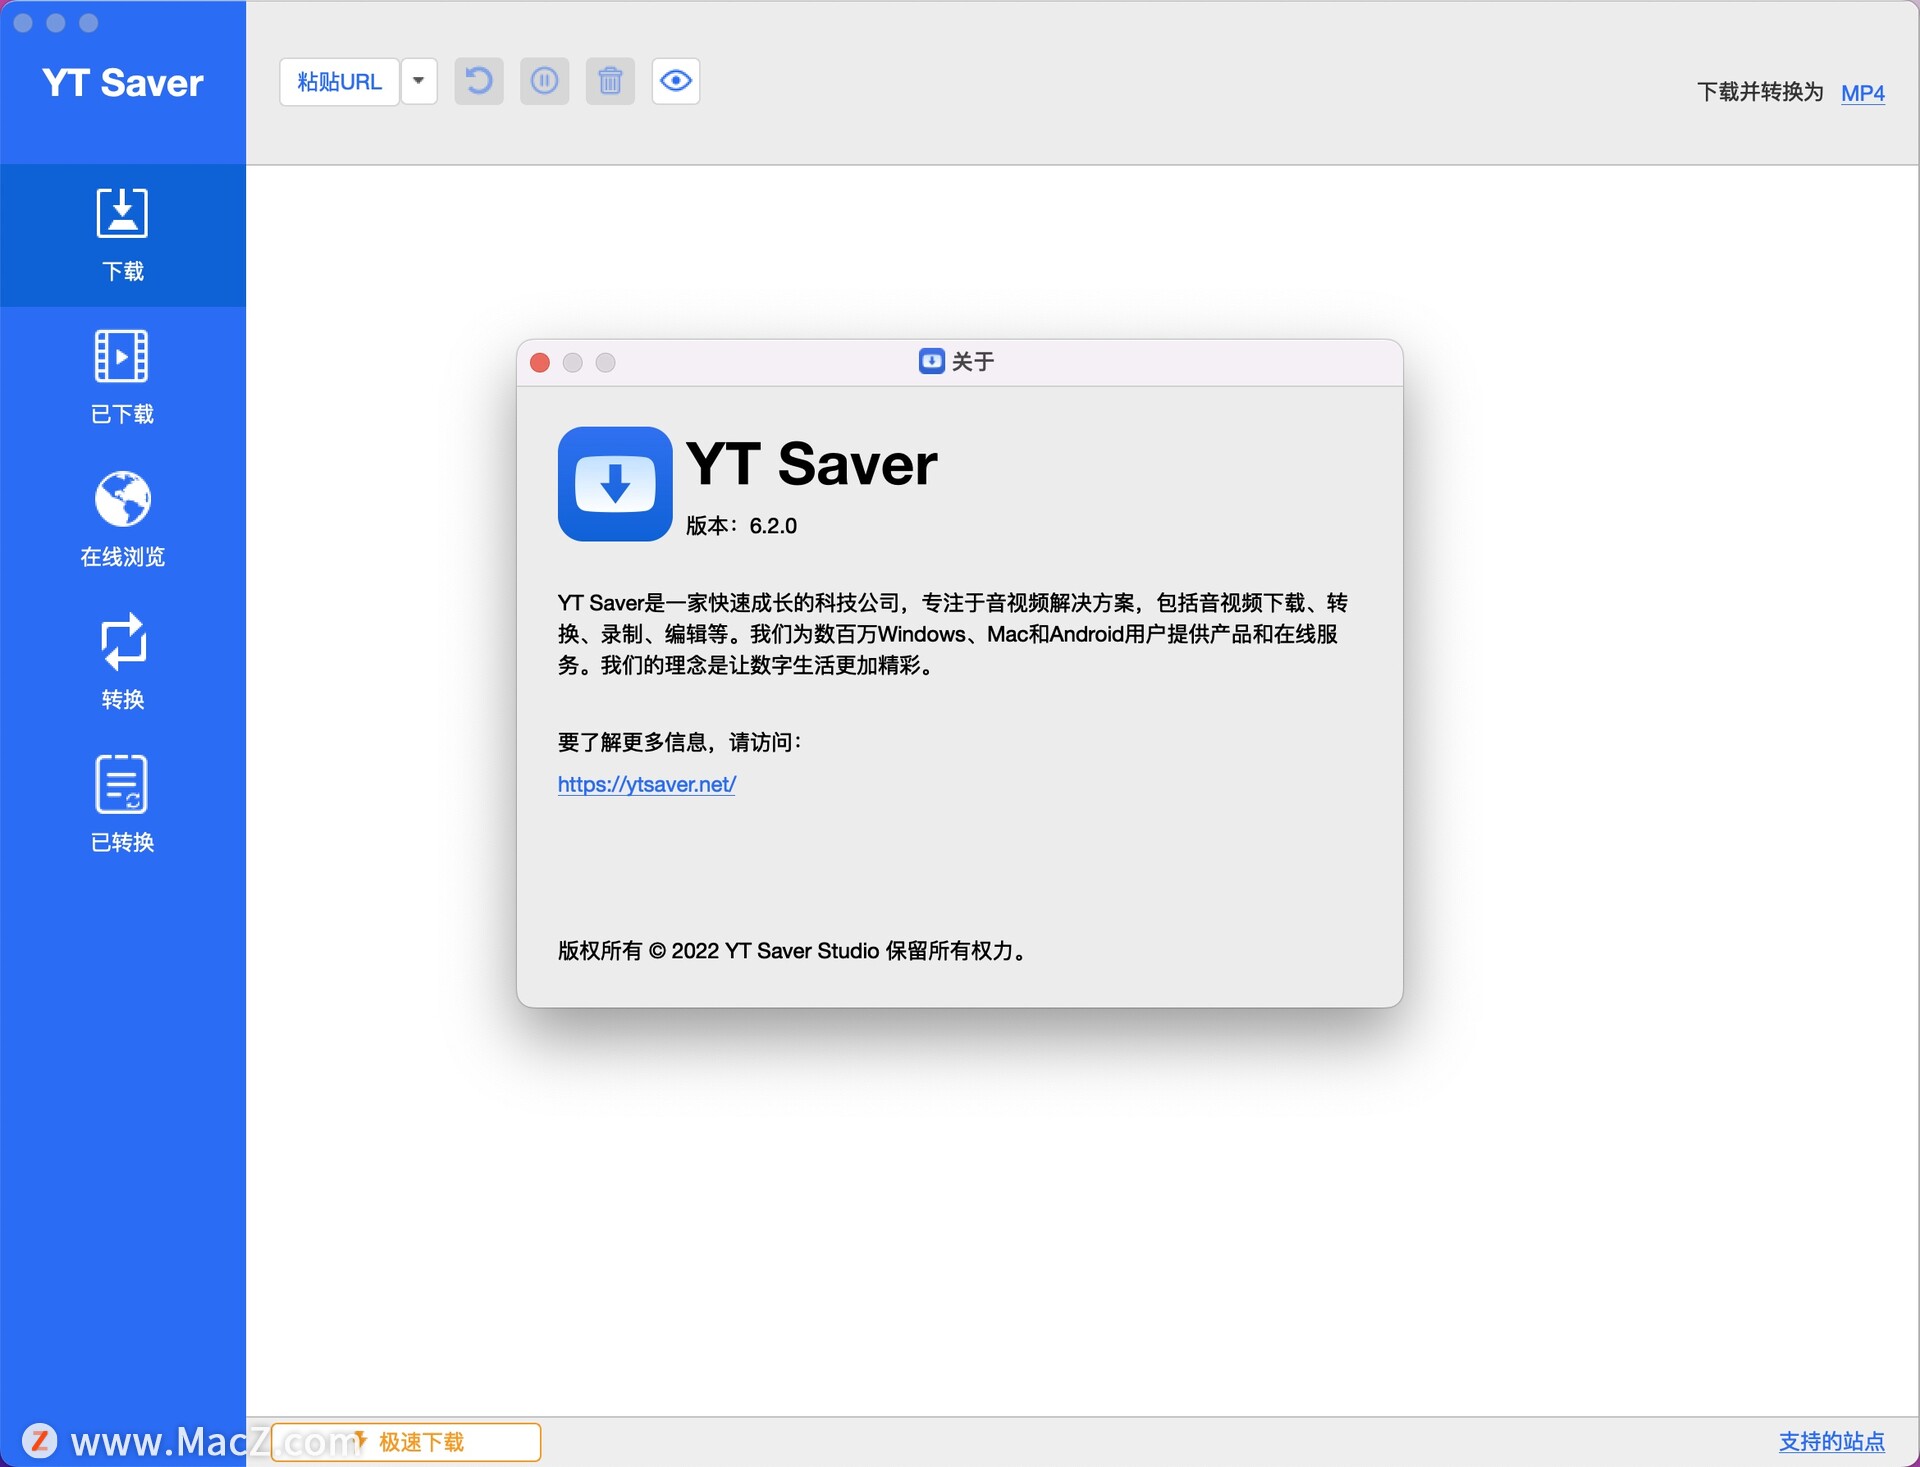 instal the new for windows YT Saver 7.0.2